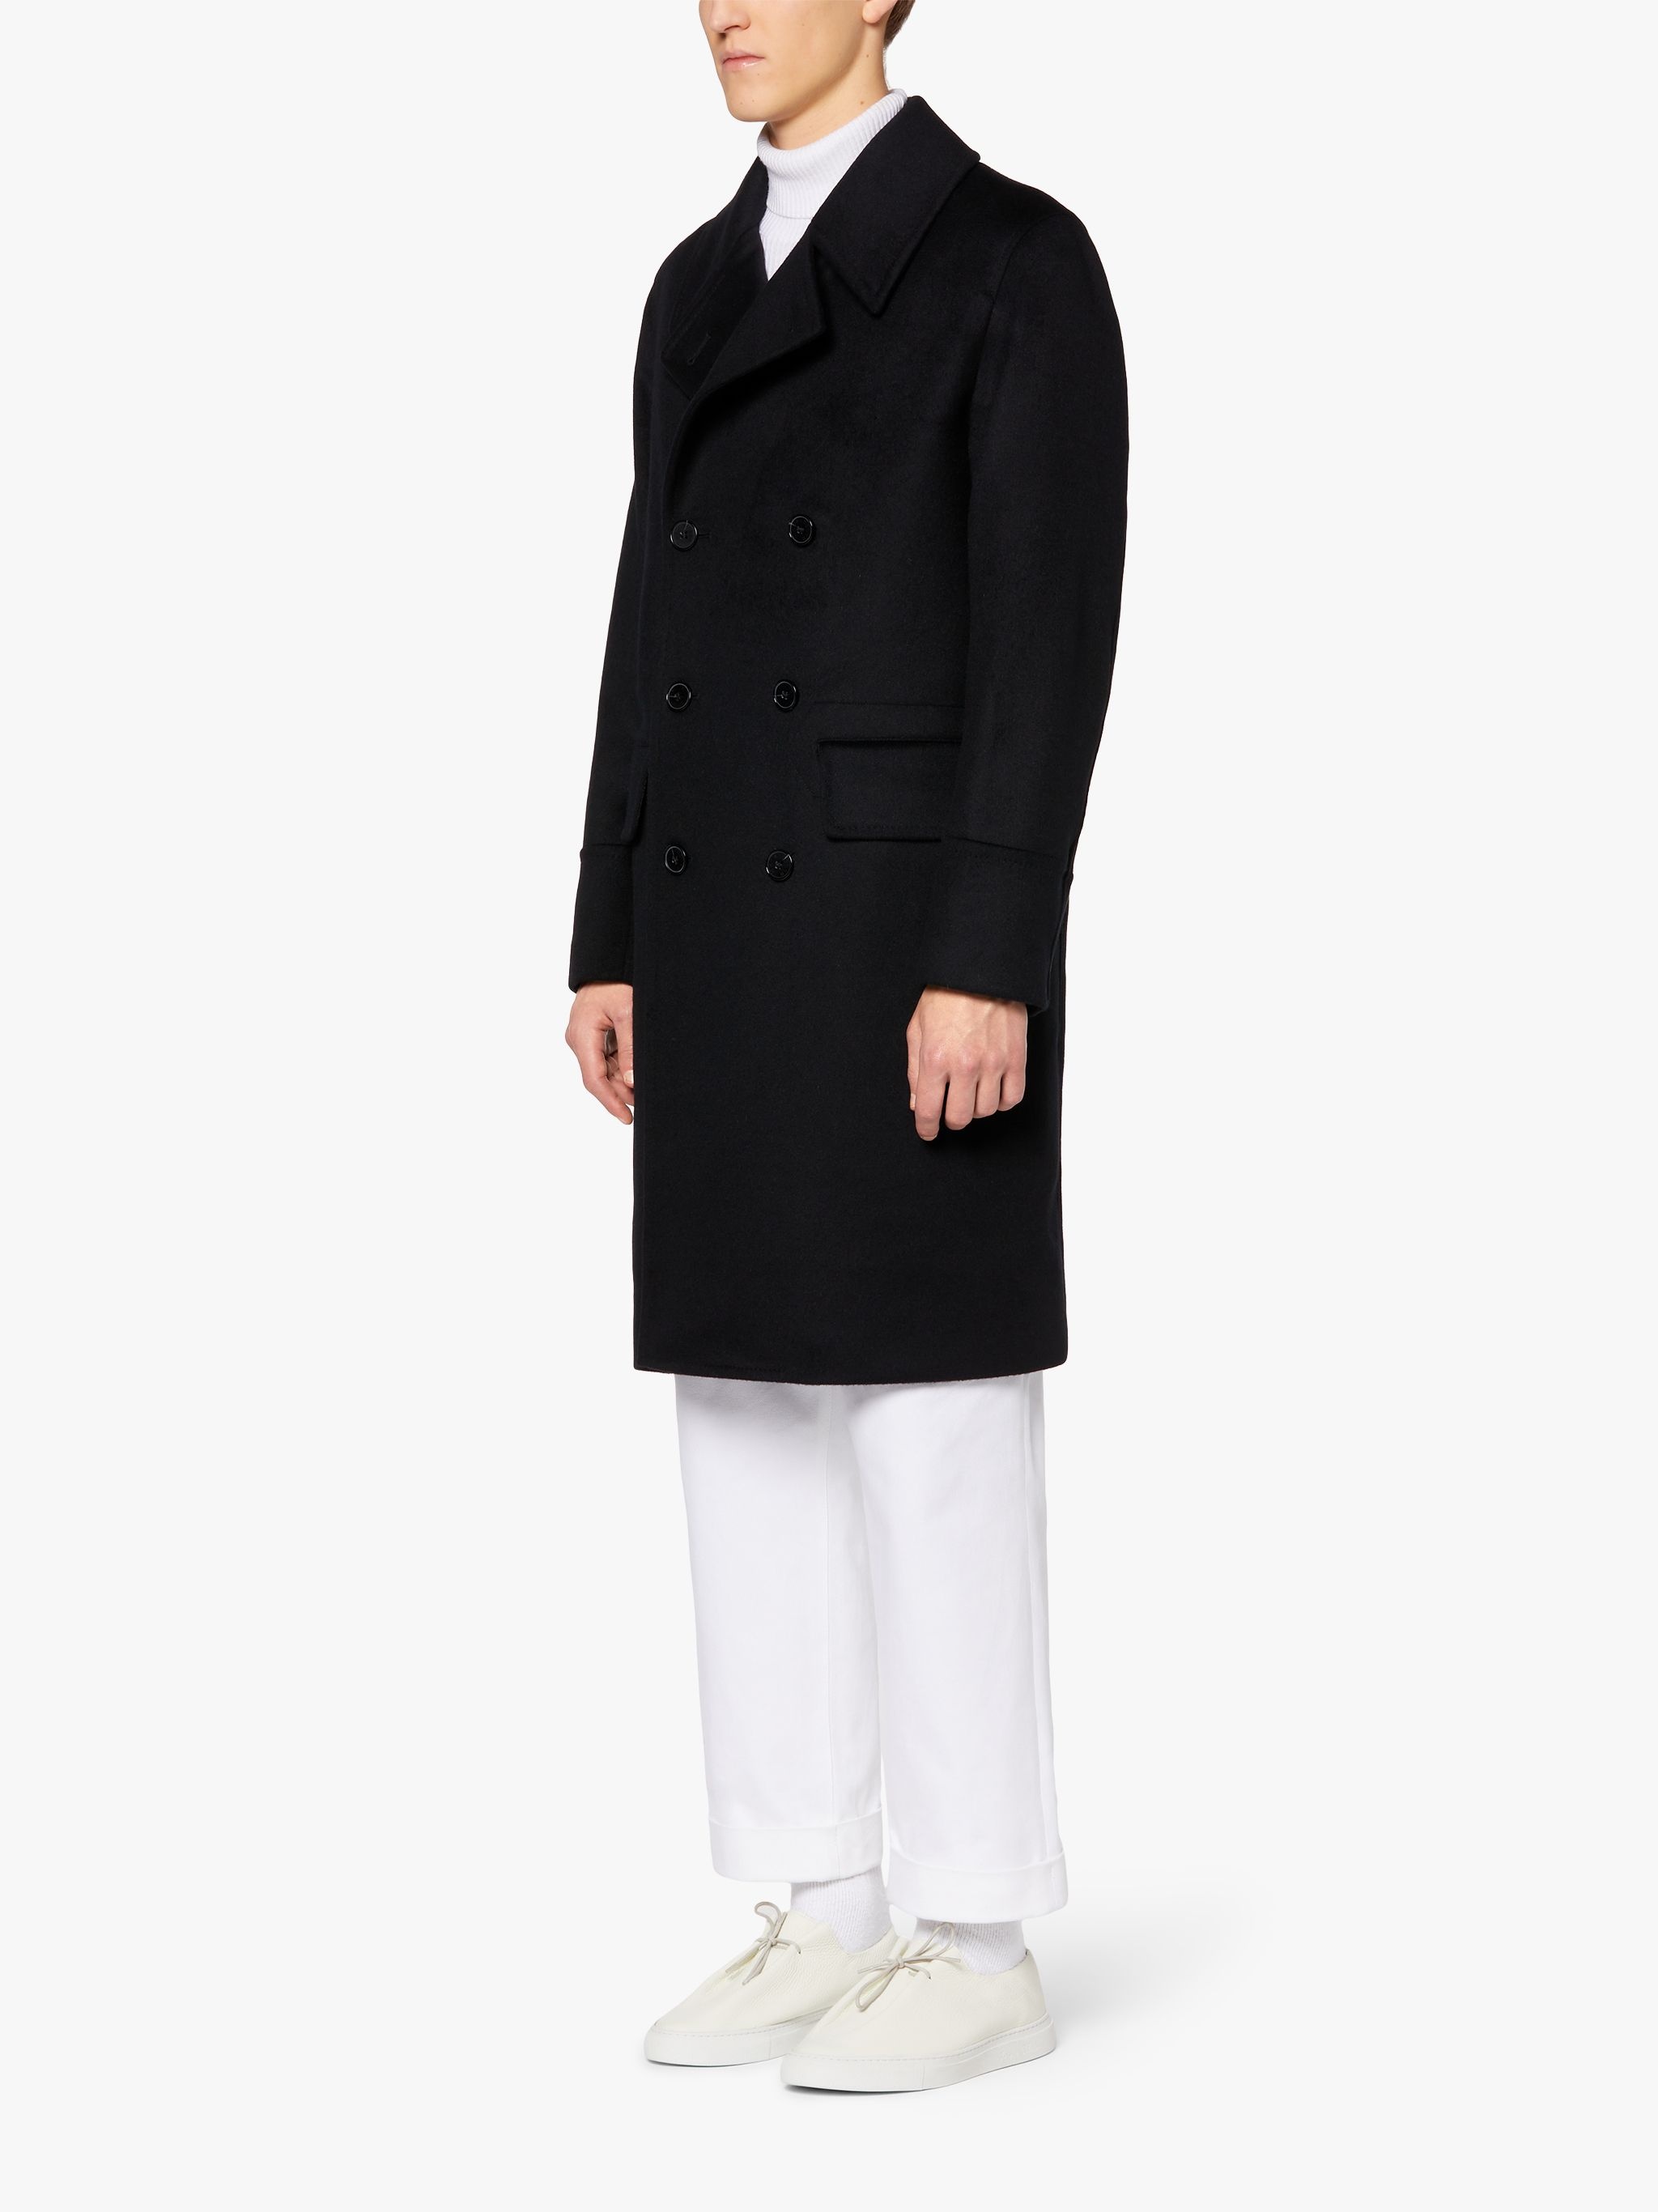 REDFORD BLACK WOOL & CASHMERE DOUBLE BREASTED COAT | GM-1101 - 4